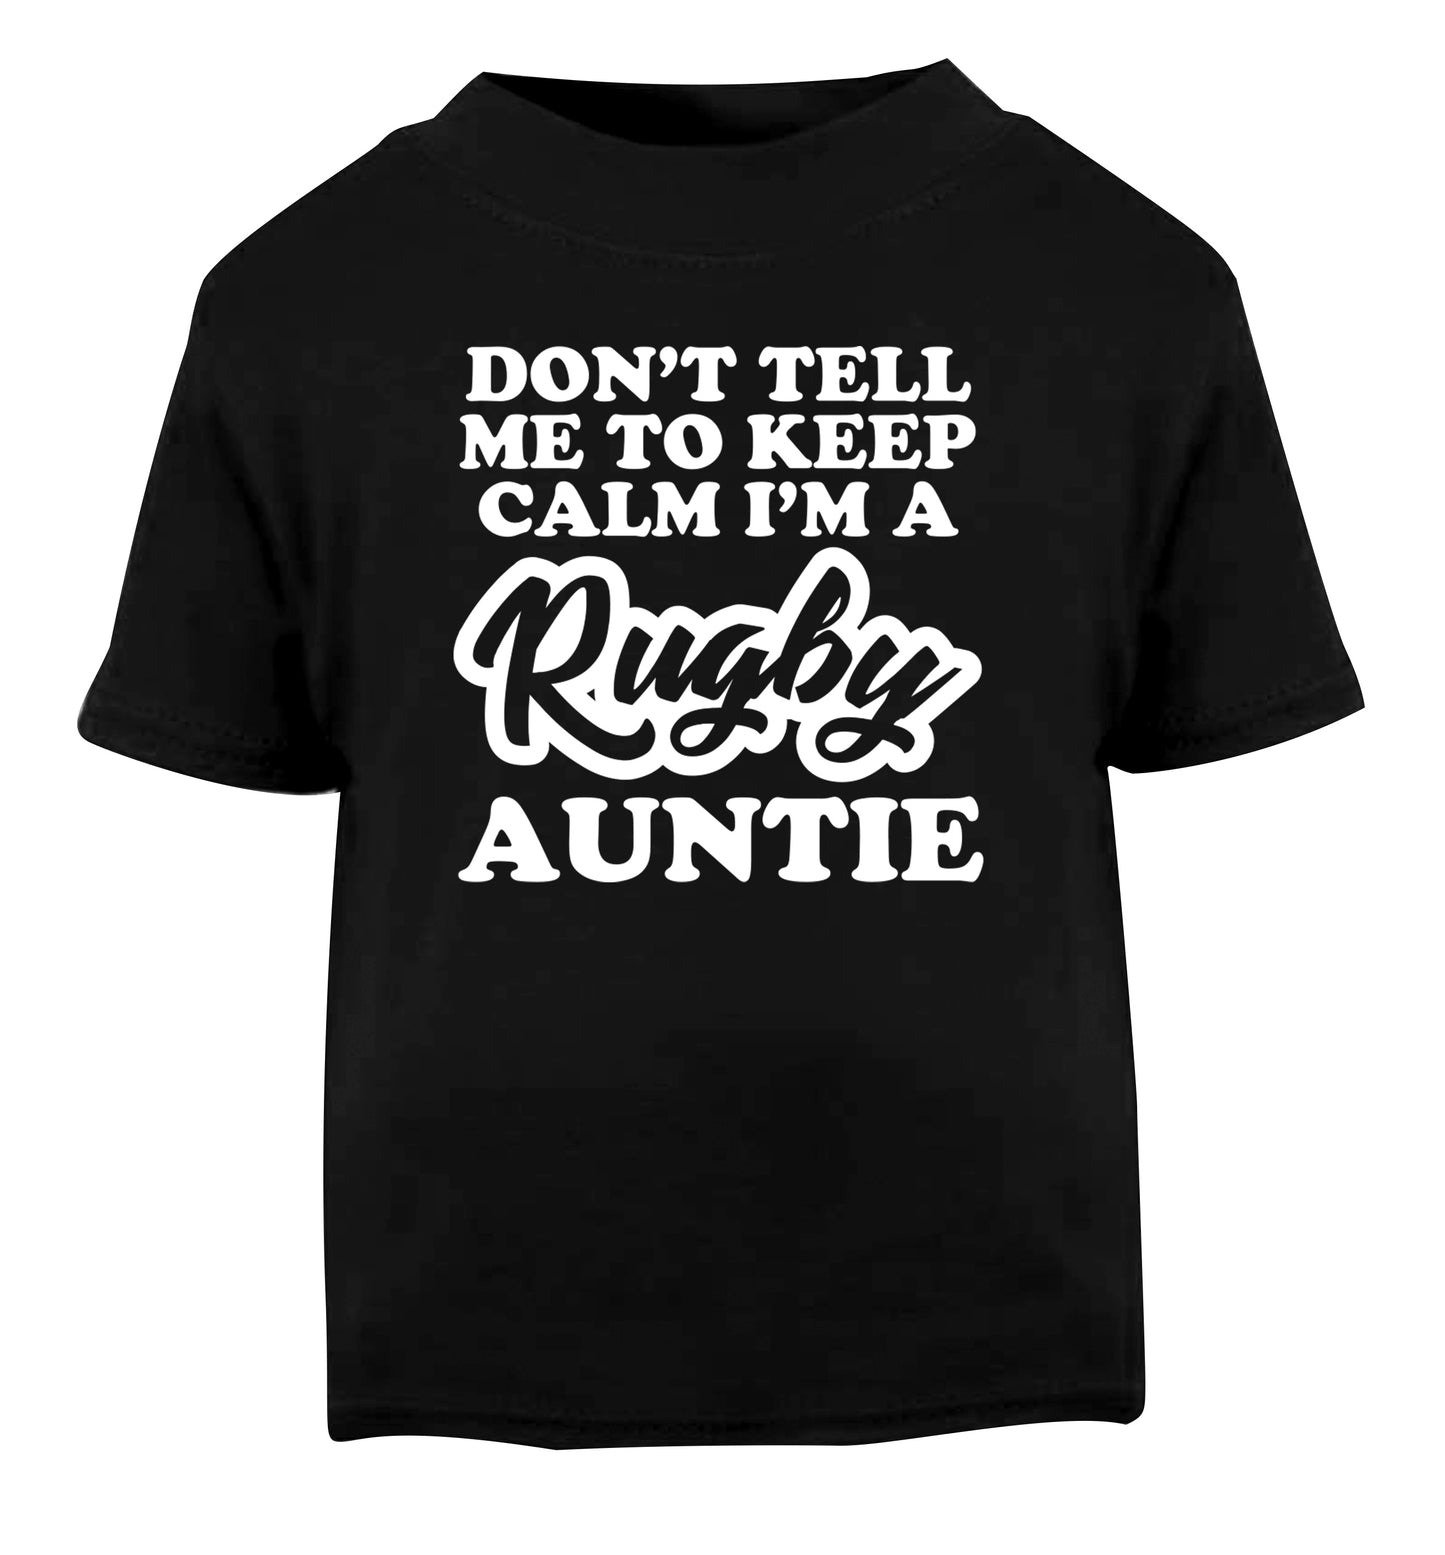 Don't tell me keep calm I'm a rugby auntie Black Baby Toddler Tshirt 2 years